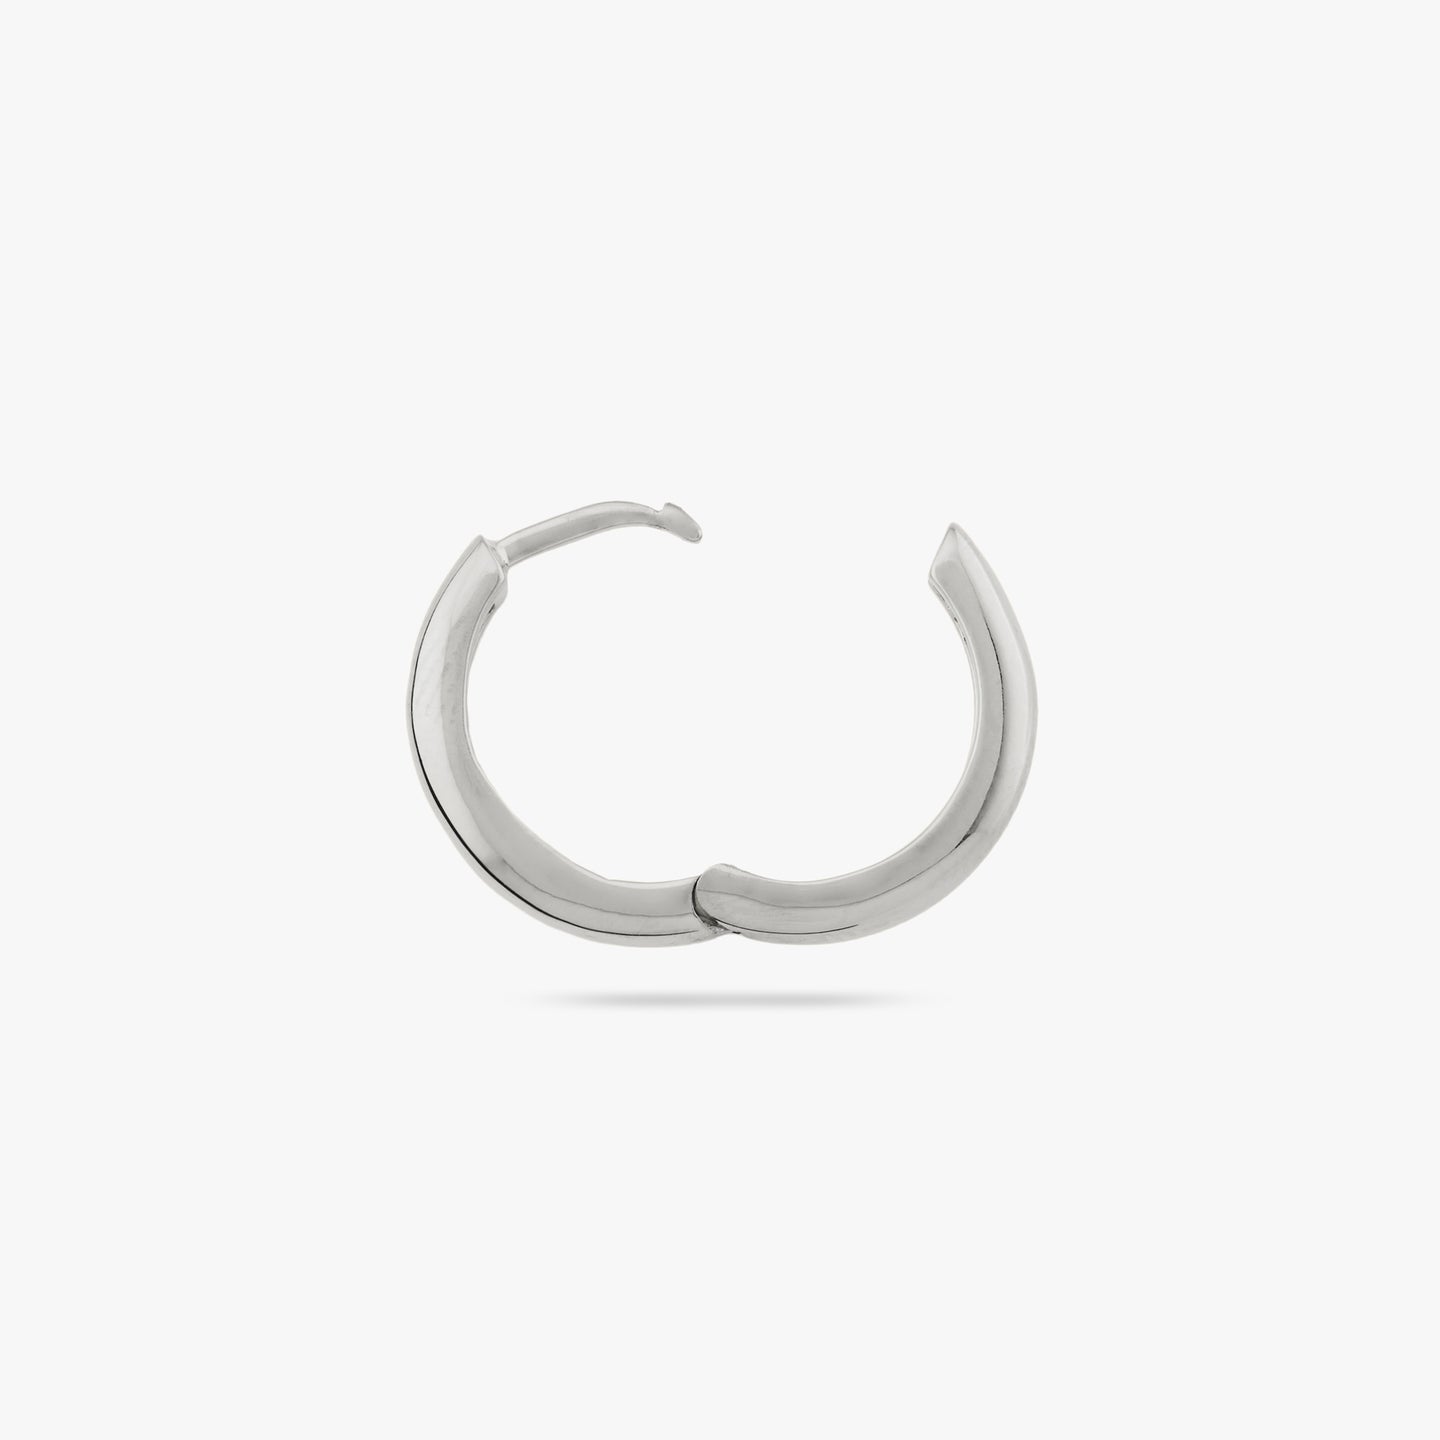 Small bulky and chunky shaped silver hoop and the clasp is undone color:null|silver